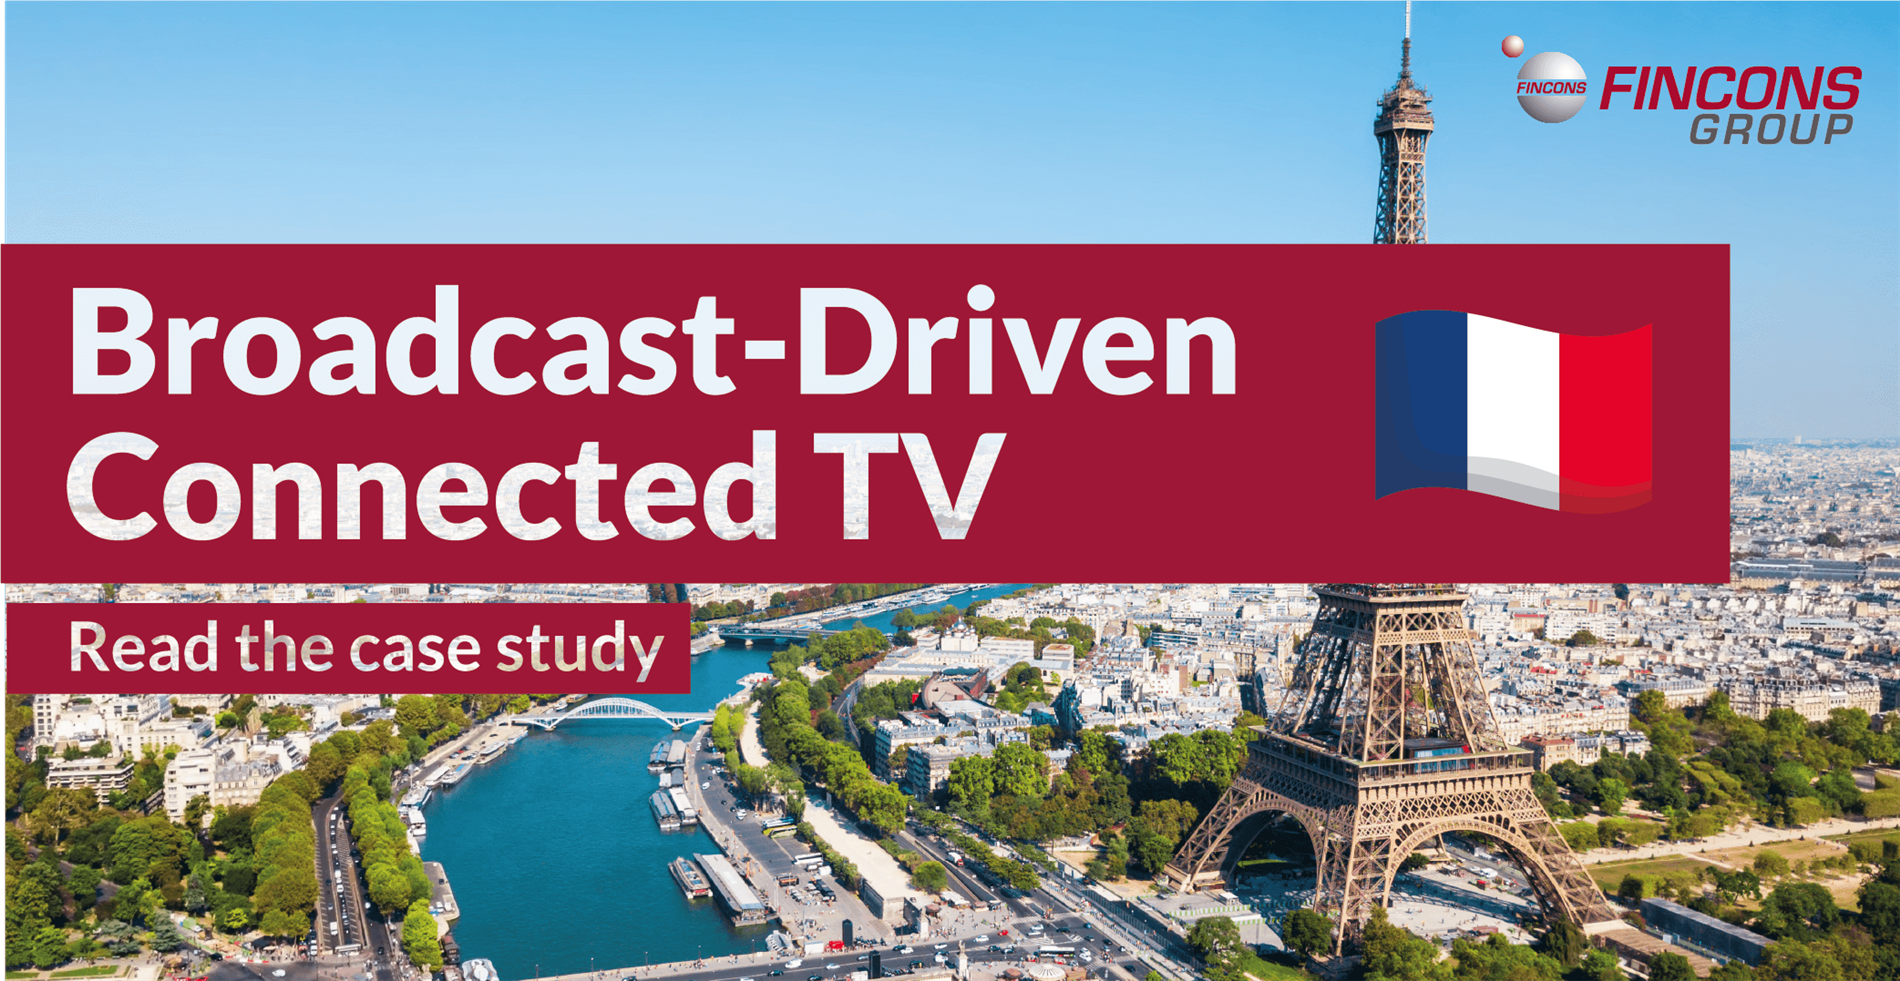 Broadcast-Driven Connected TV